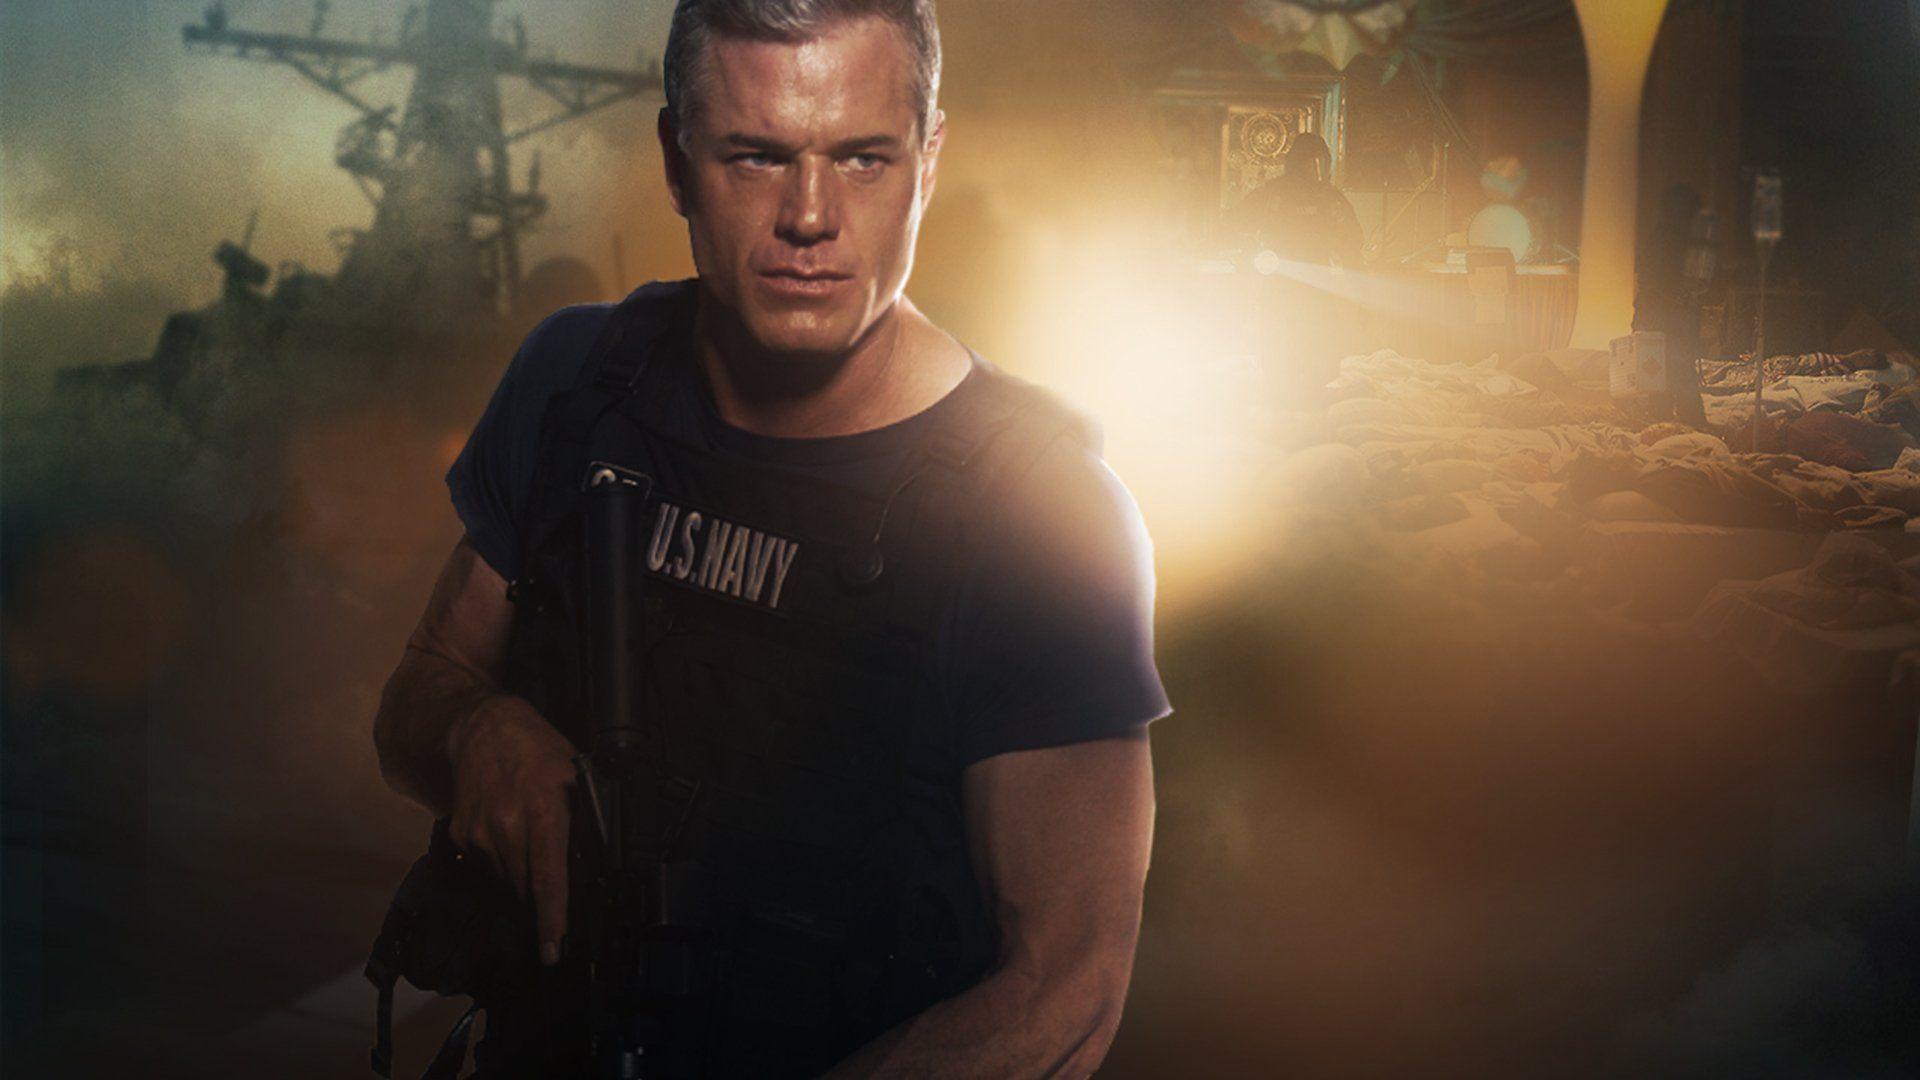 The Last Ship HD Wallpaper and Background Image